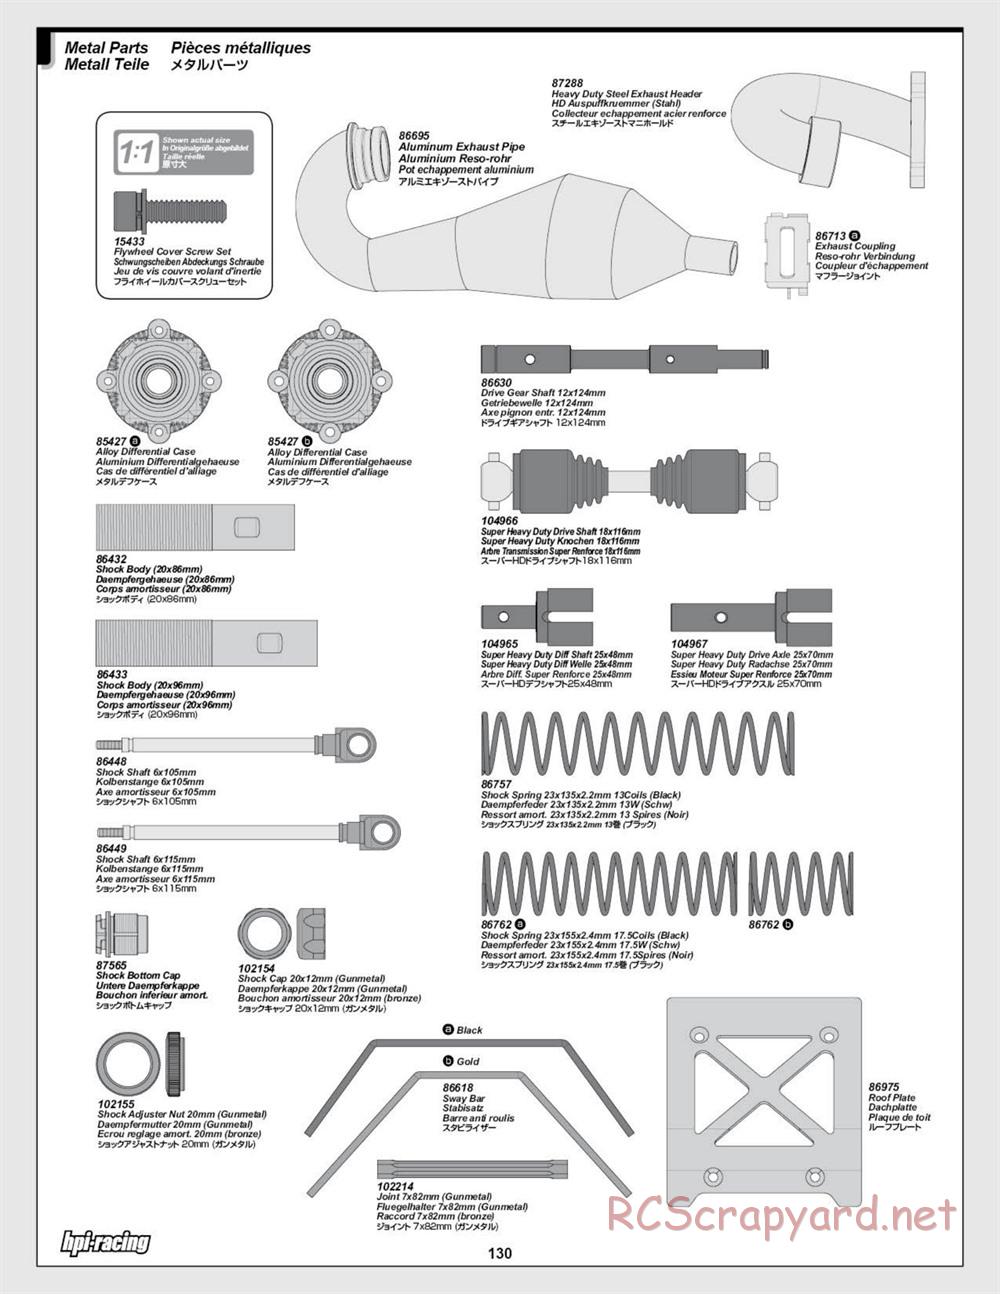 HPI - Baja 5SC SS - Exploded View - Page 130